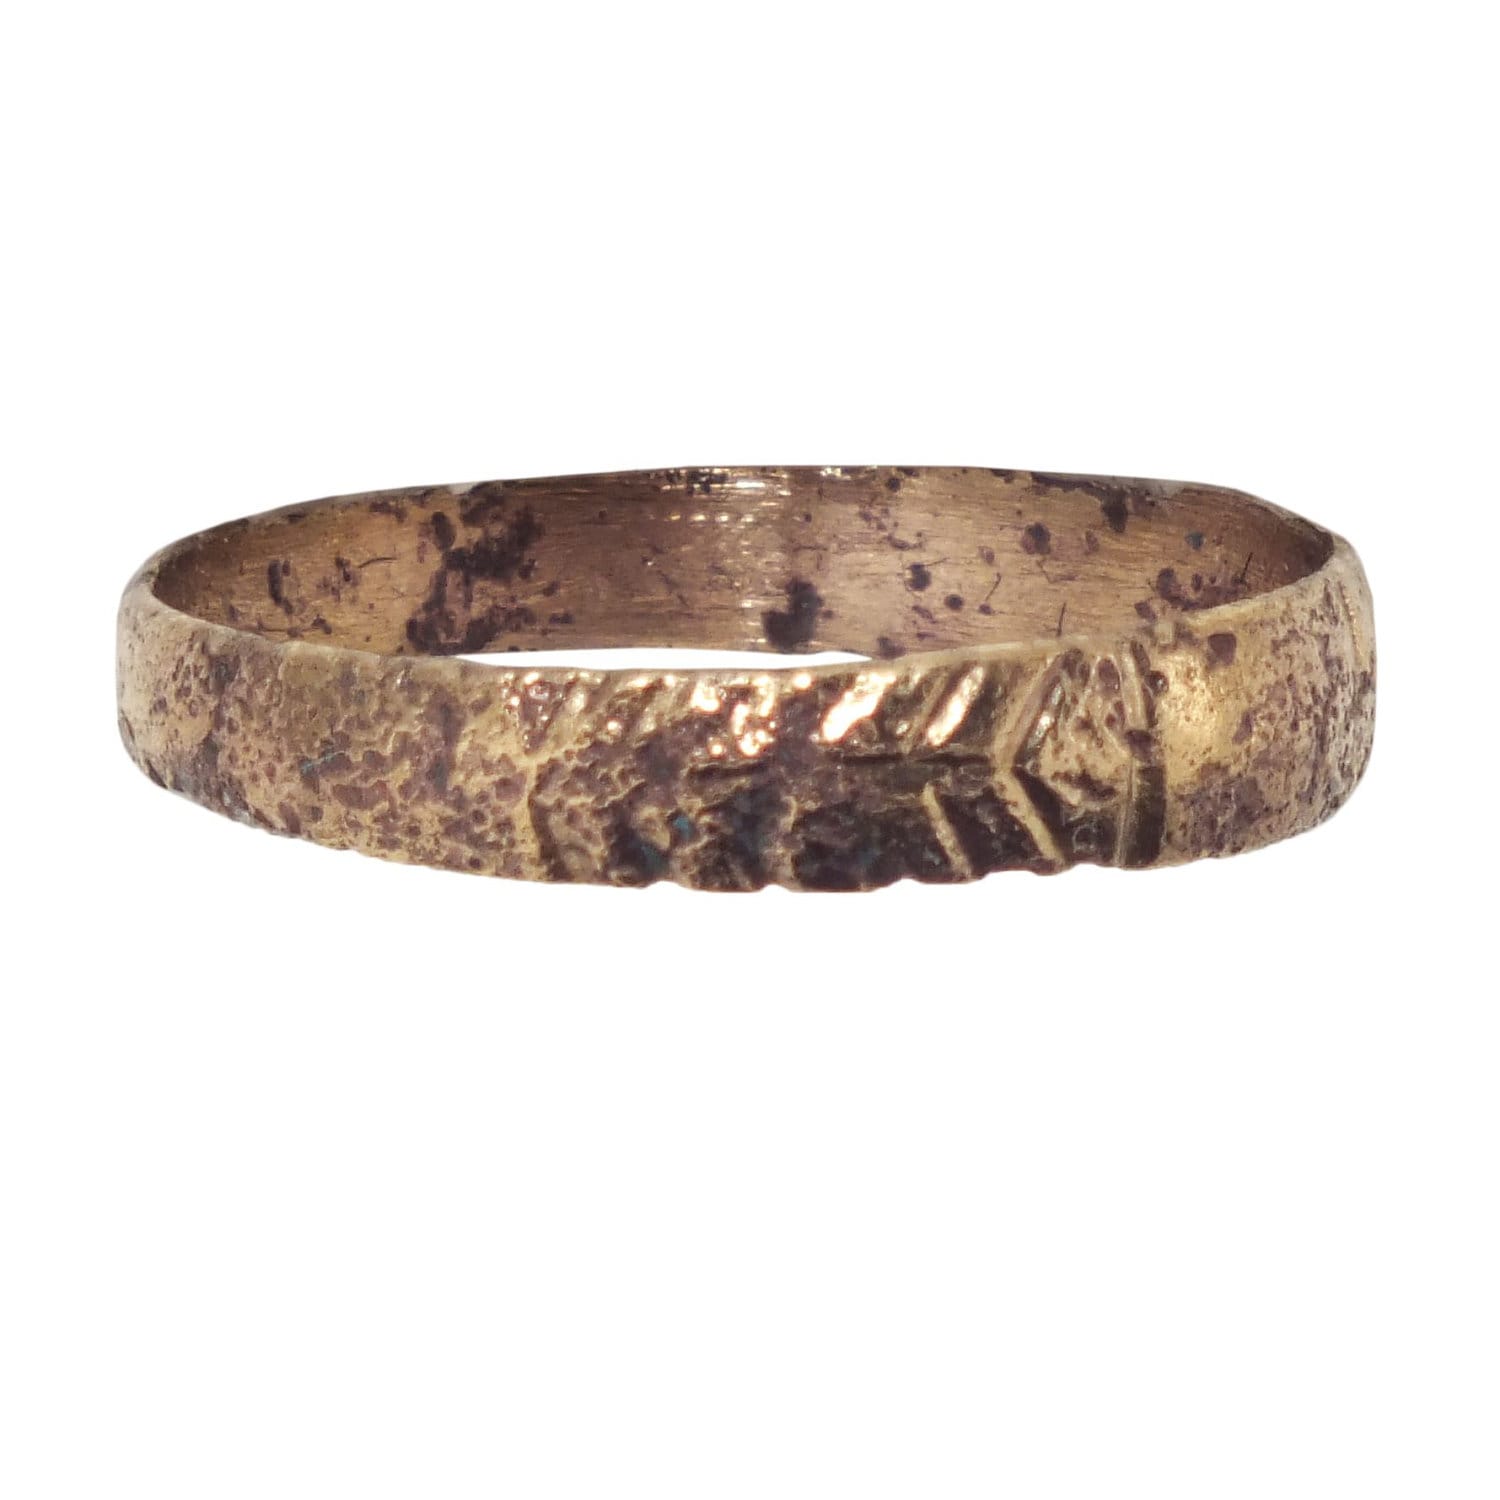 Picardi Ancient Viking Wedding Ring Jewelry. by